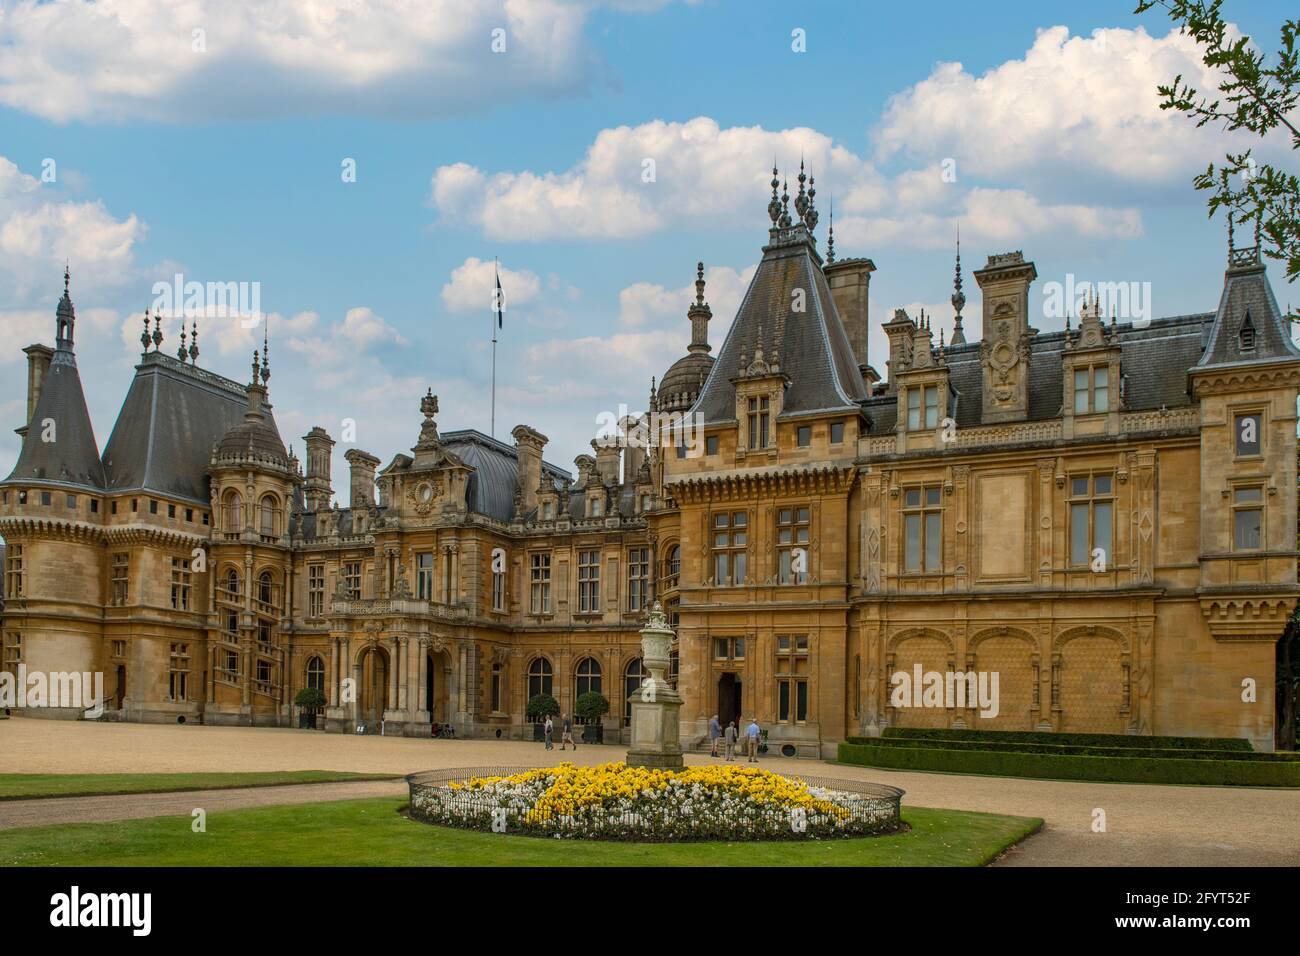 Waddesdon Manor, près d'Aylesbury, Buckinghamshire, Angleterre Banque D'Images